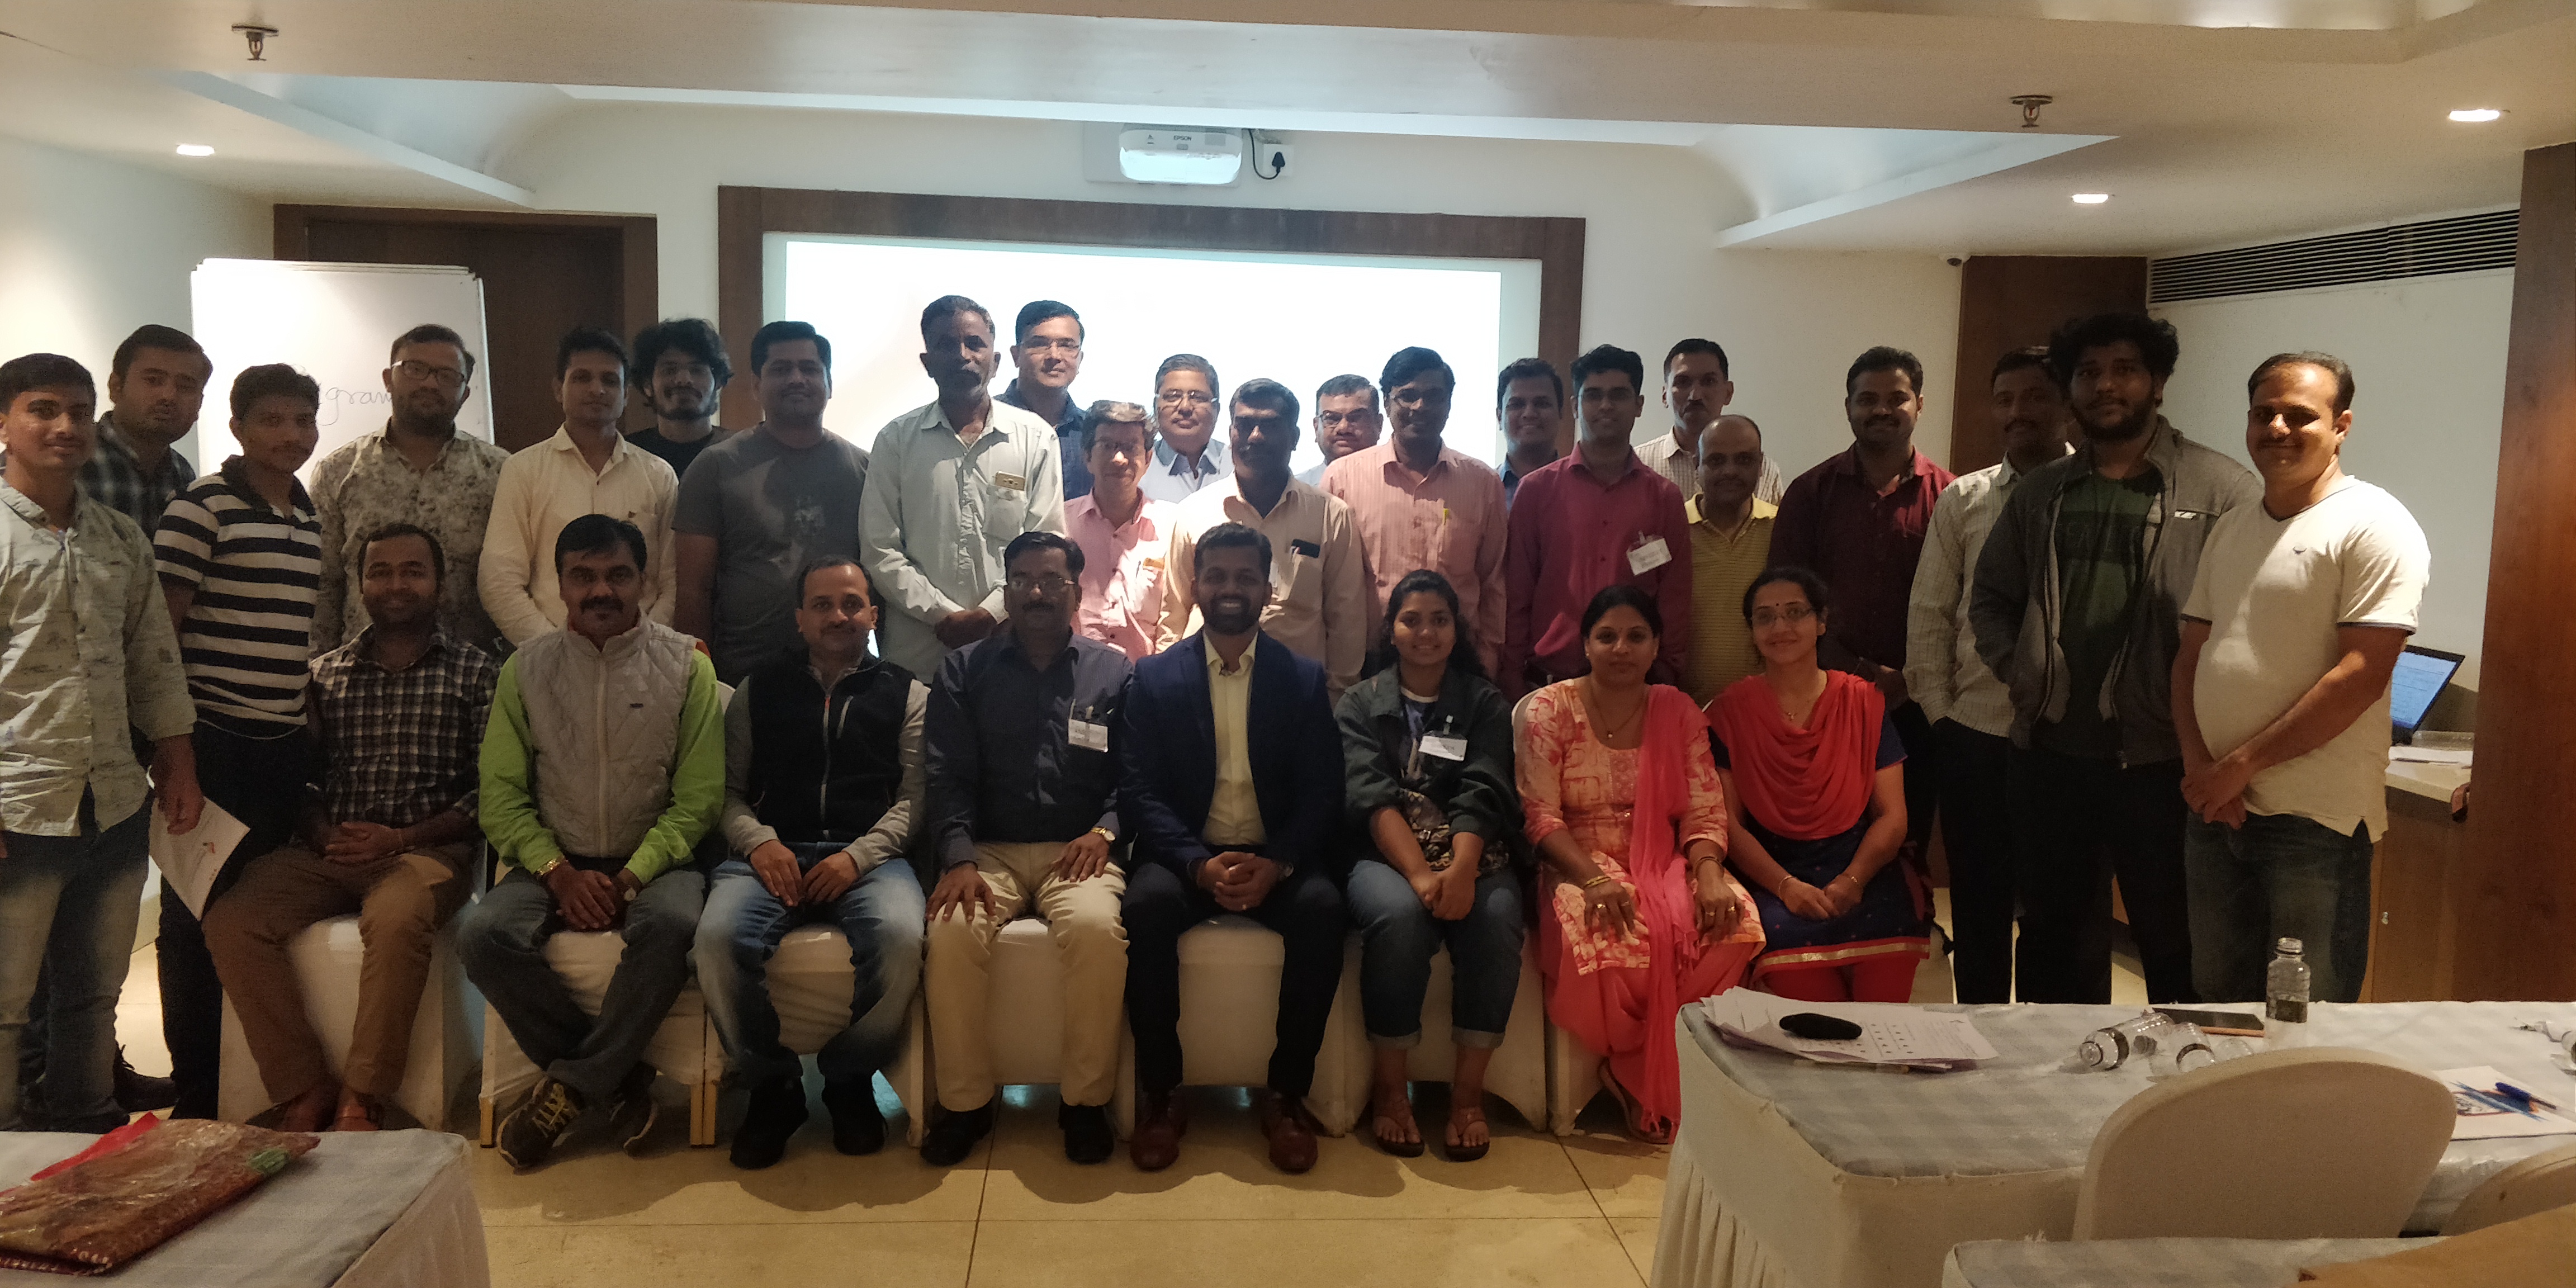 Share market Class in Pune